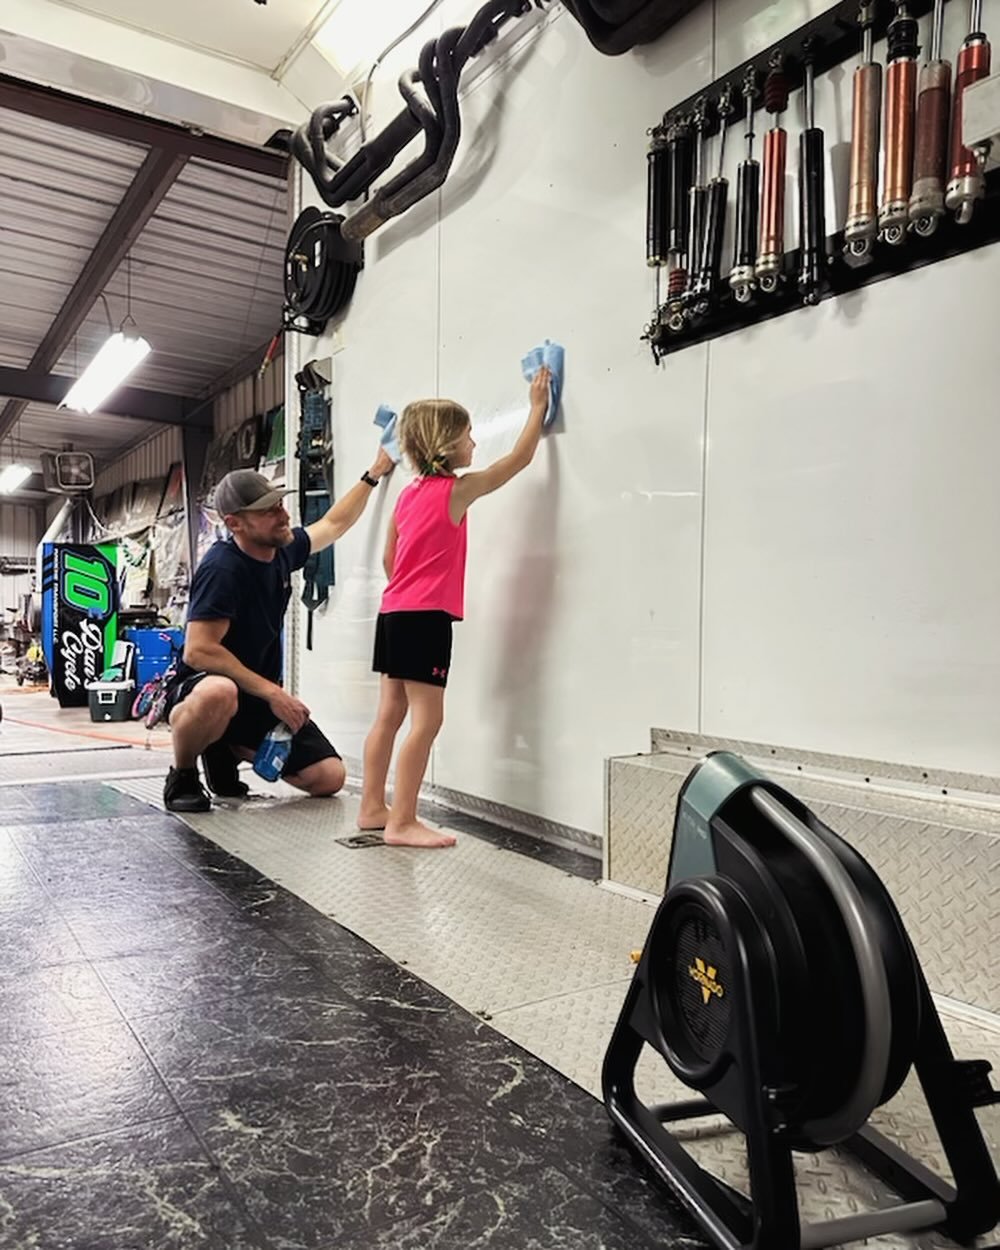 Mother Nature has been wreaking havoc on our race schedule lately, but tonight it was all hands on deck getting this shined up for the Newton Car Show Saturday, May 4th!

We used the new RTR HD High-Velocity Air Circulator from @vornado to dry the fl